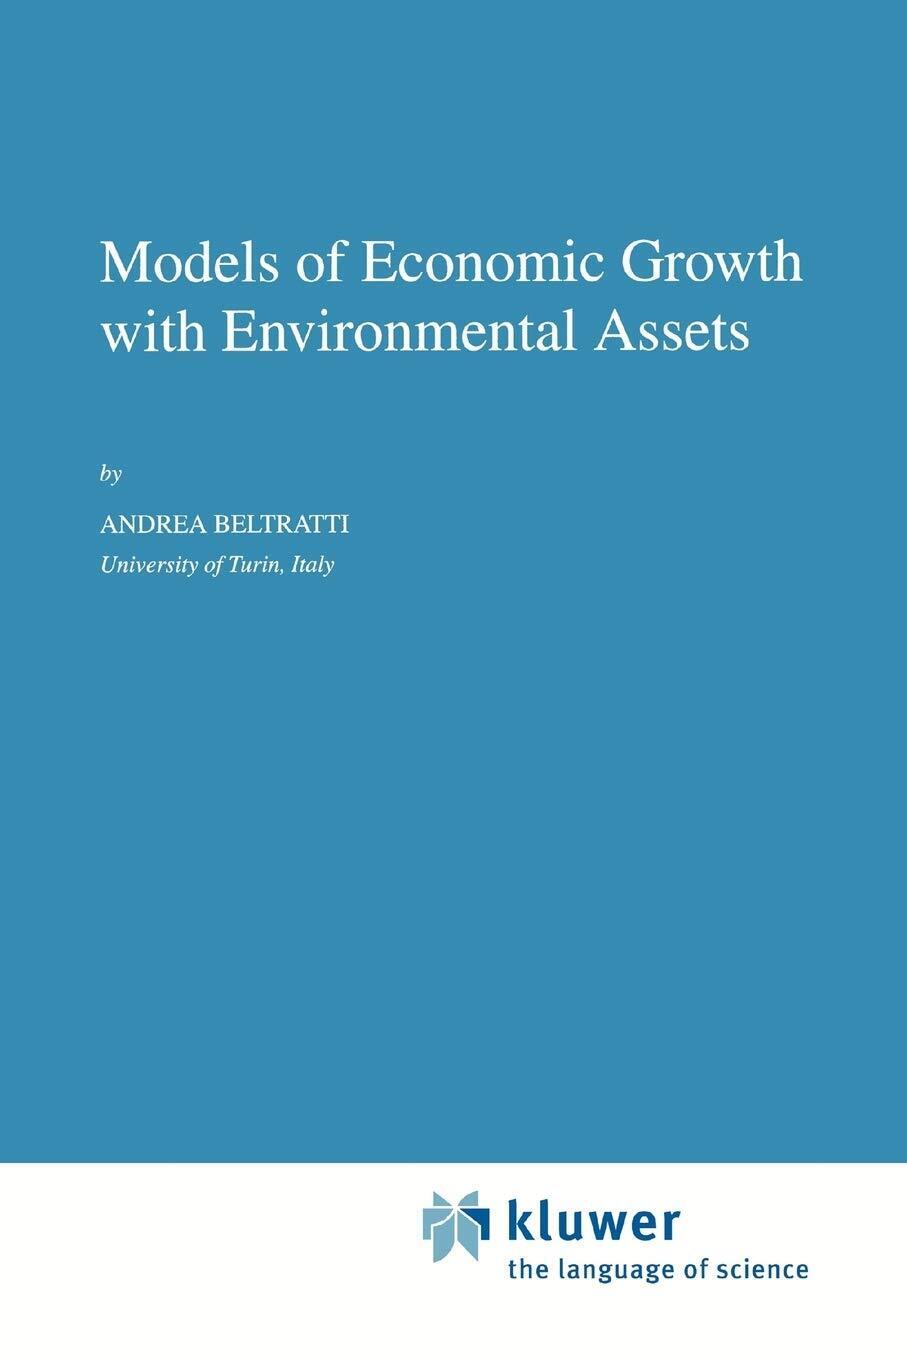 Models of Economic Growth with Environmental Assets - A. Beltratti-Springer,2010